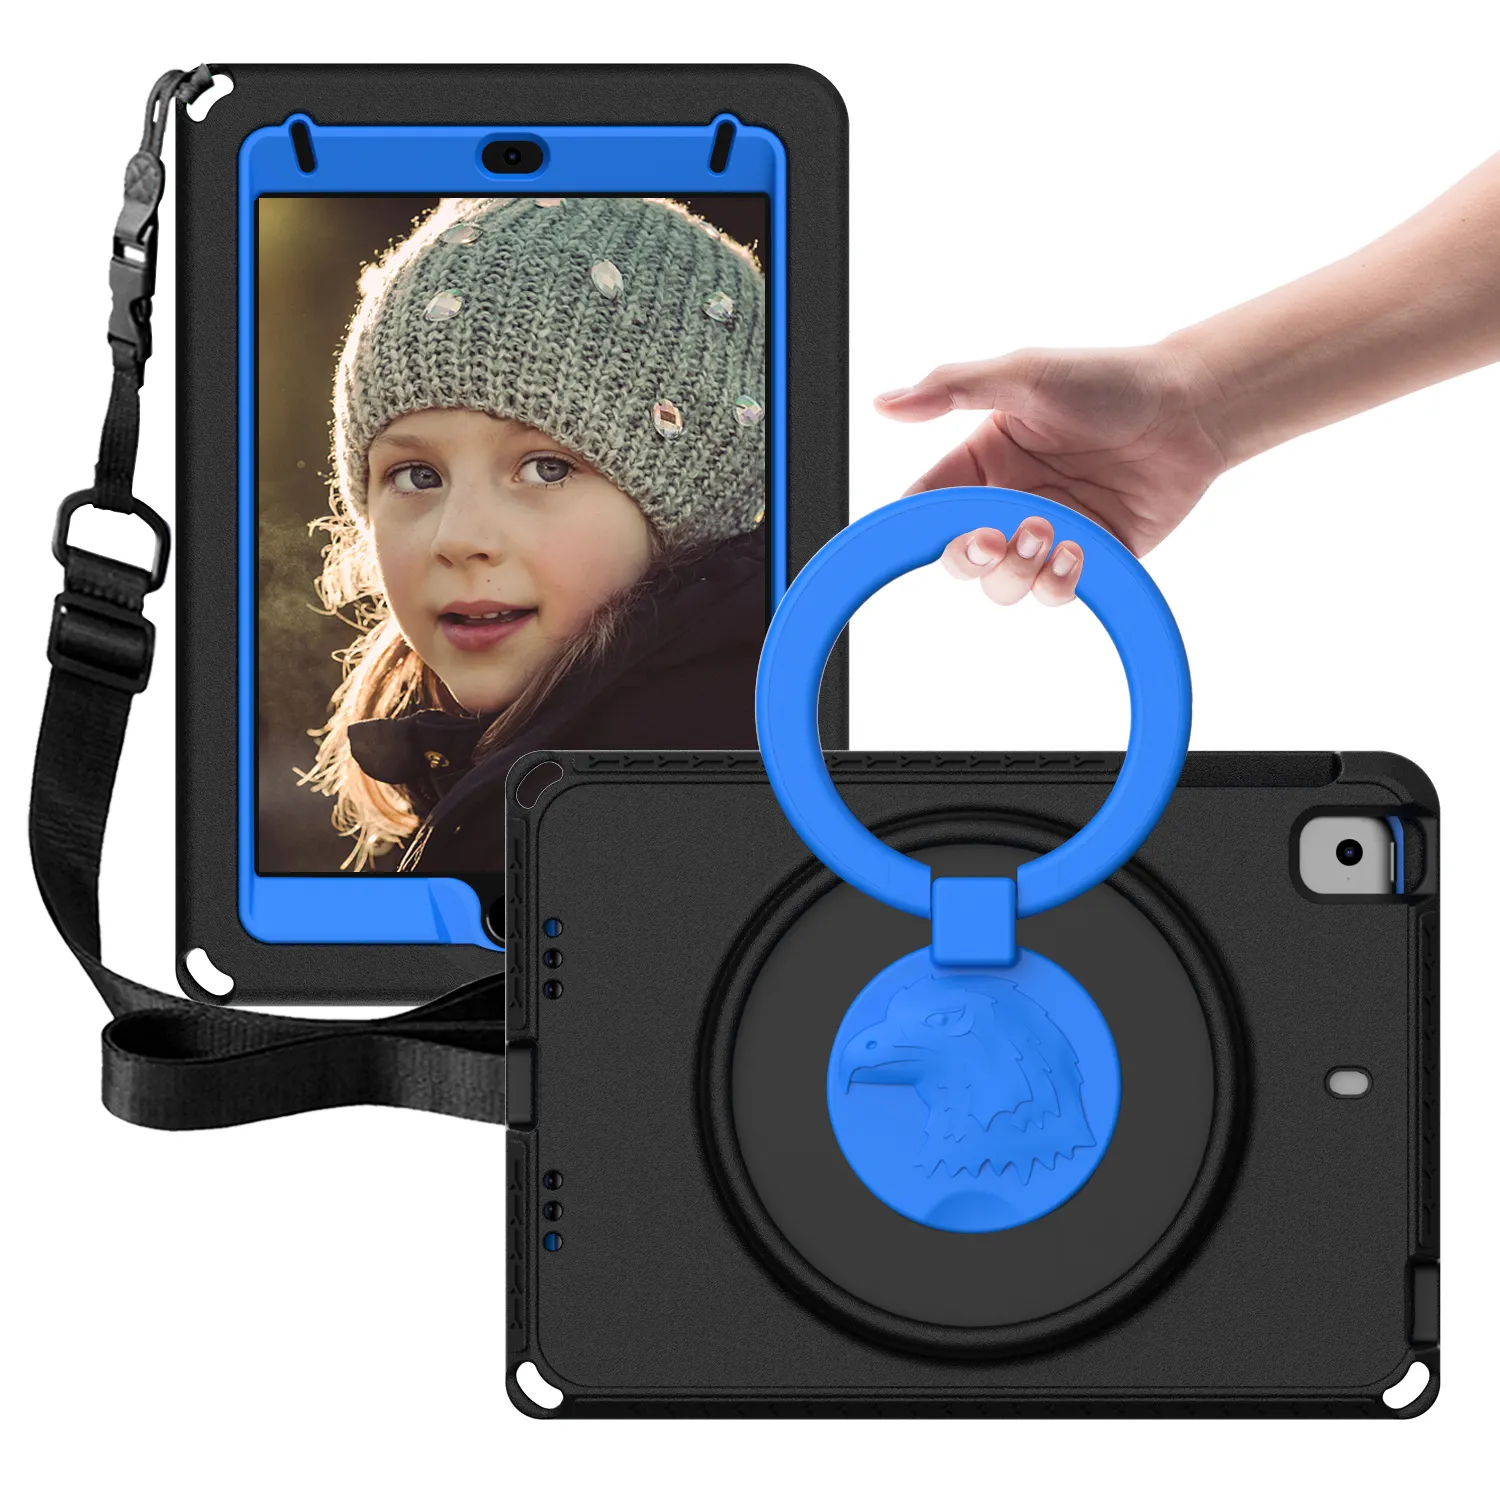 360 Rotatable Folding Handle Grip Kids Shockproof Tablet Cases For iPad MINI 1 2 3 4 5th Gen Full Protect Cover